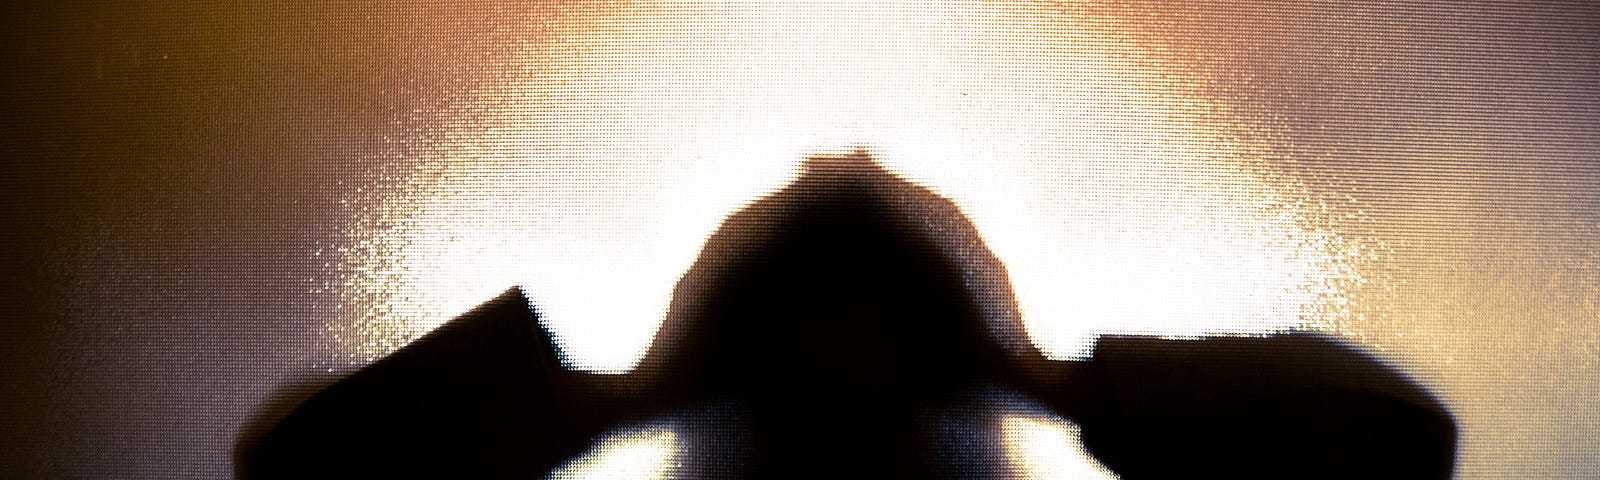 Colour backlit image of the silhouette of a woman with her hands on her head in a gesture of despair. The silhouette is distorted, and the arms elongated, giving an alien-like quality. The image is sinister and foreboding, with an element of horror. It is as if the ‘woman’ is trying to escape from behind the glass. Horizontal image with copy space.